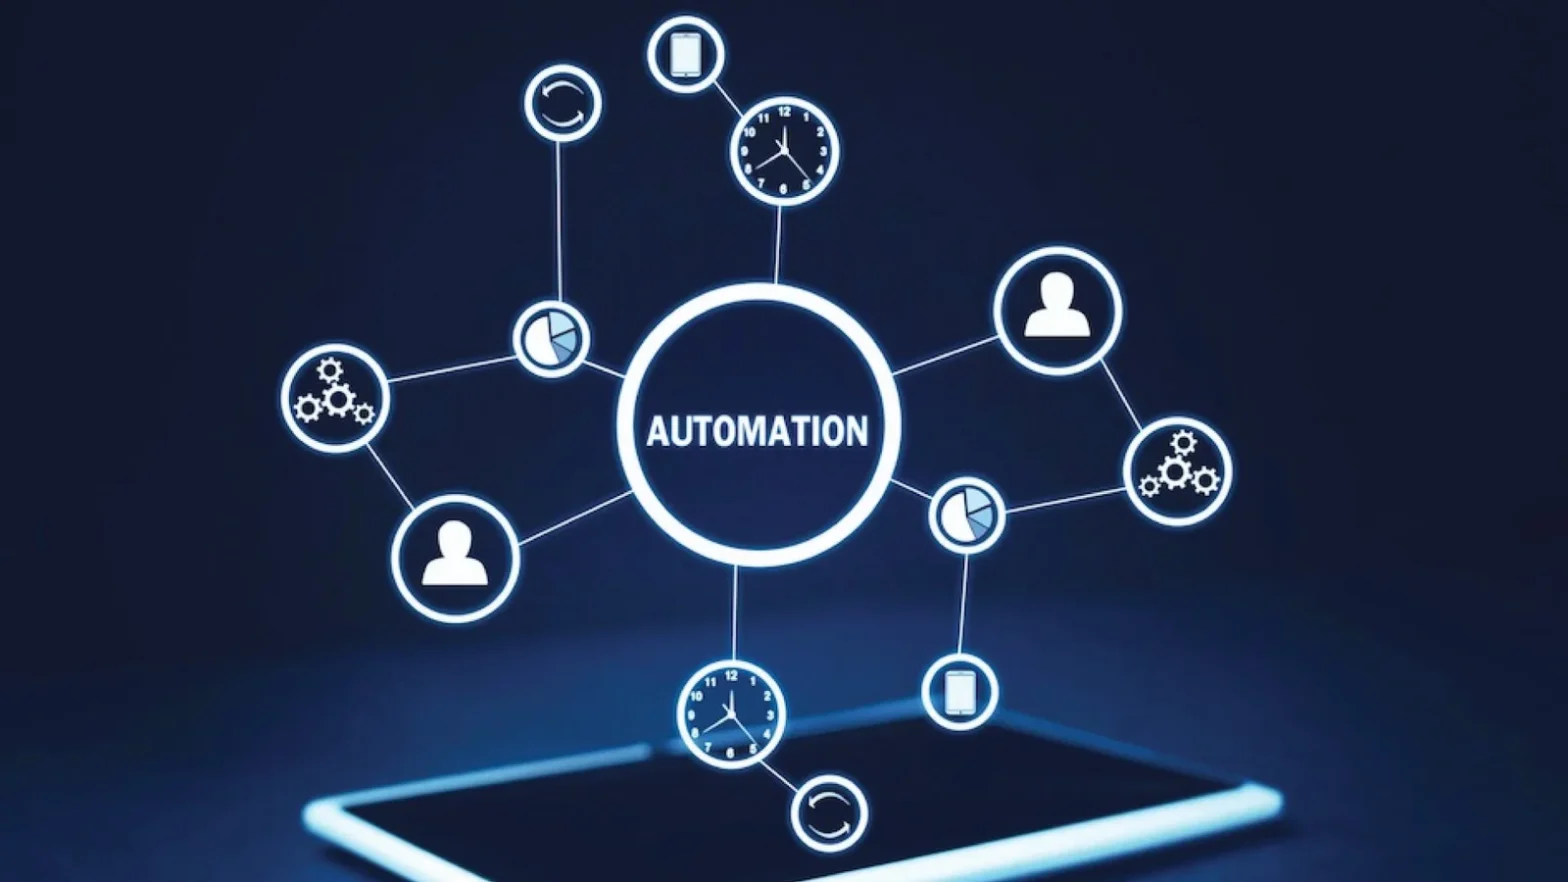 Application Release Automation Market